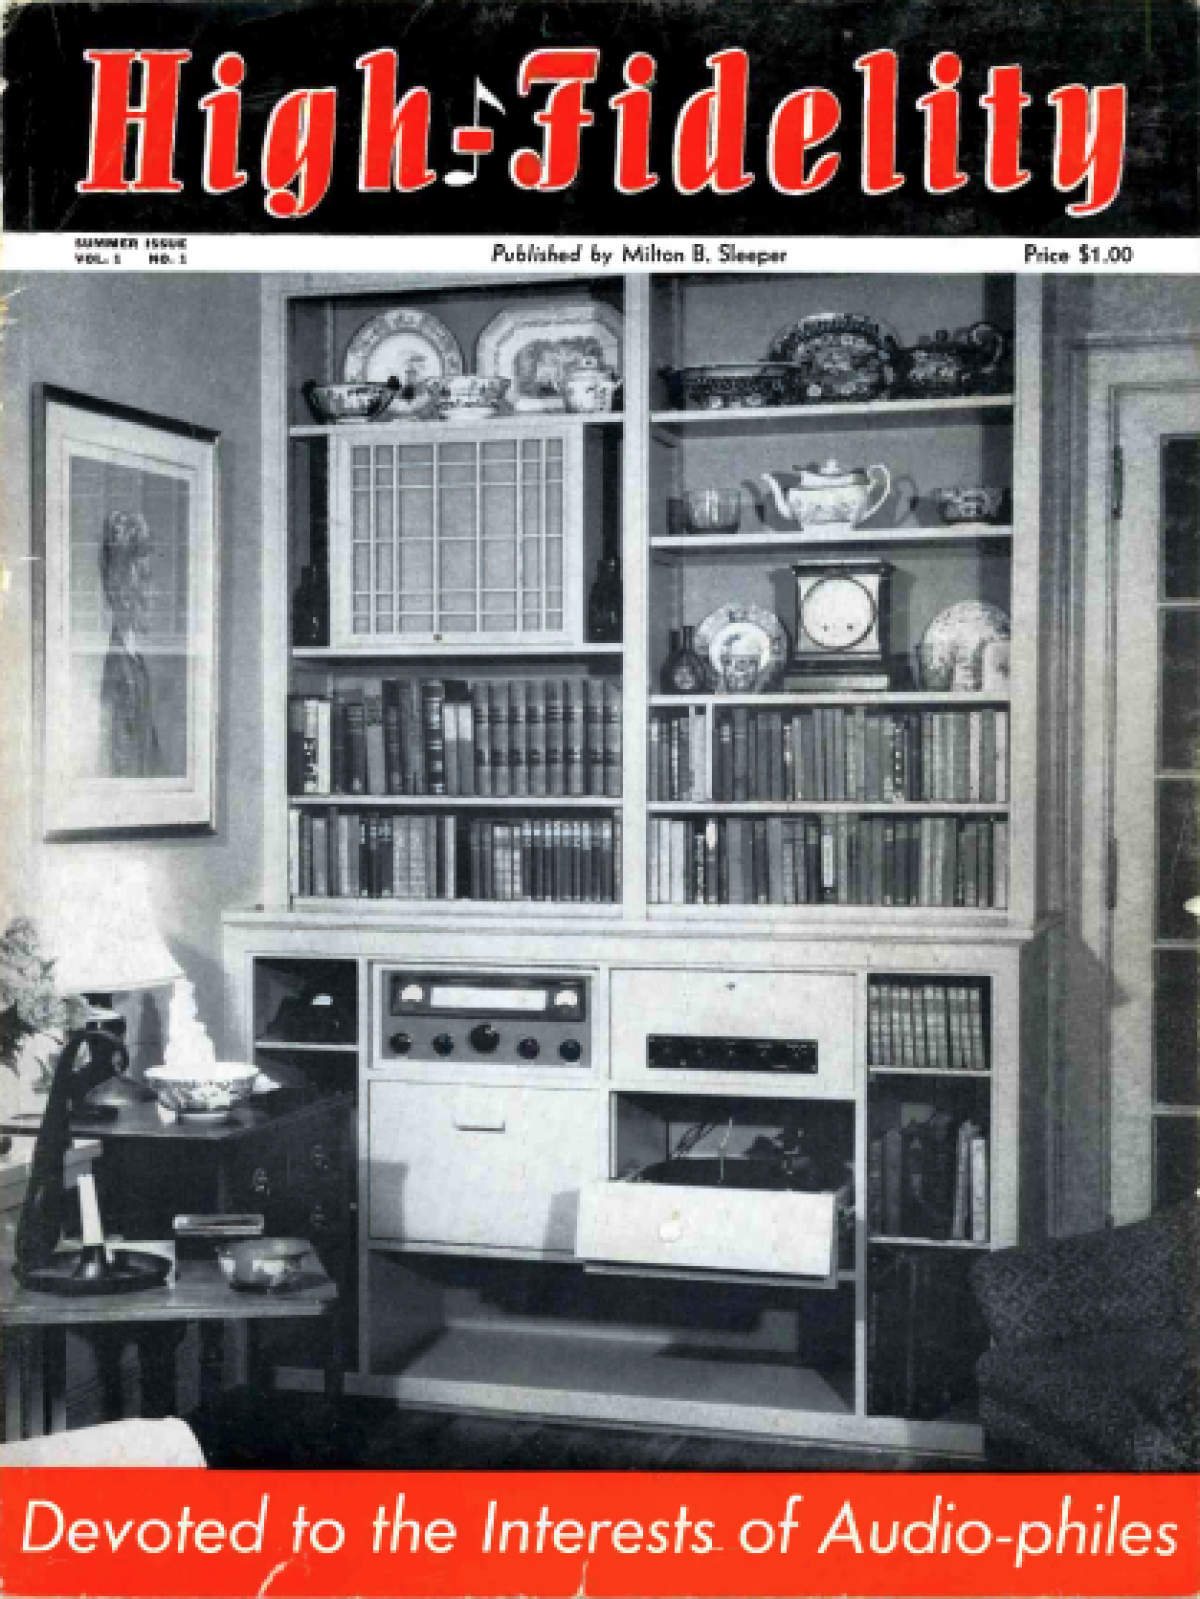 The debut issue of High Fidelity magazine in 1951 featured a cover photo of a top-grade home stereo system.